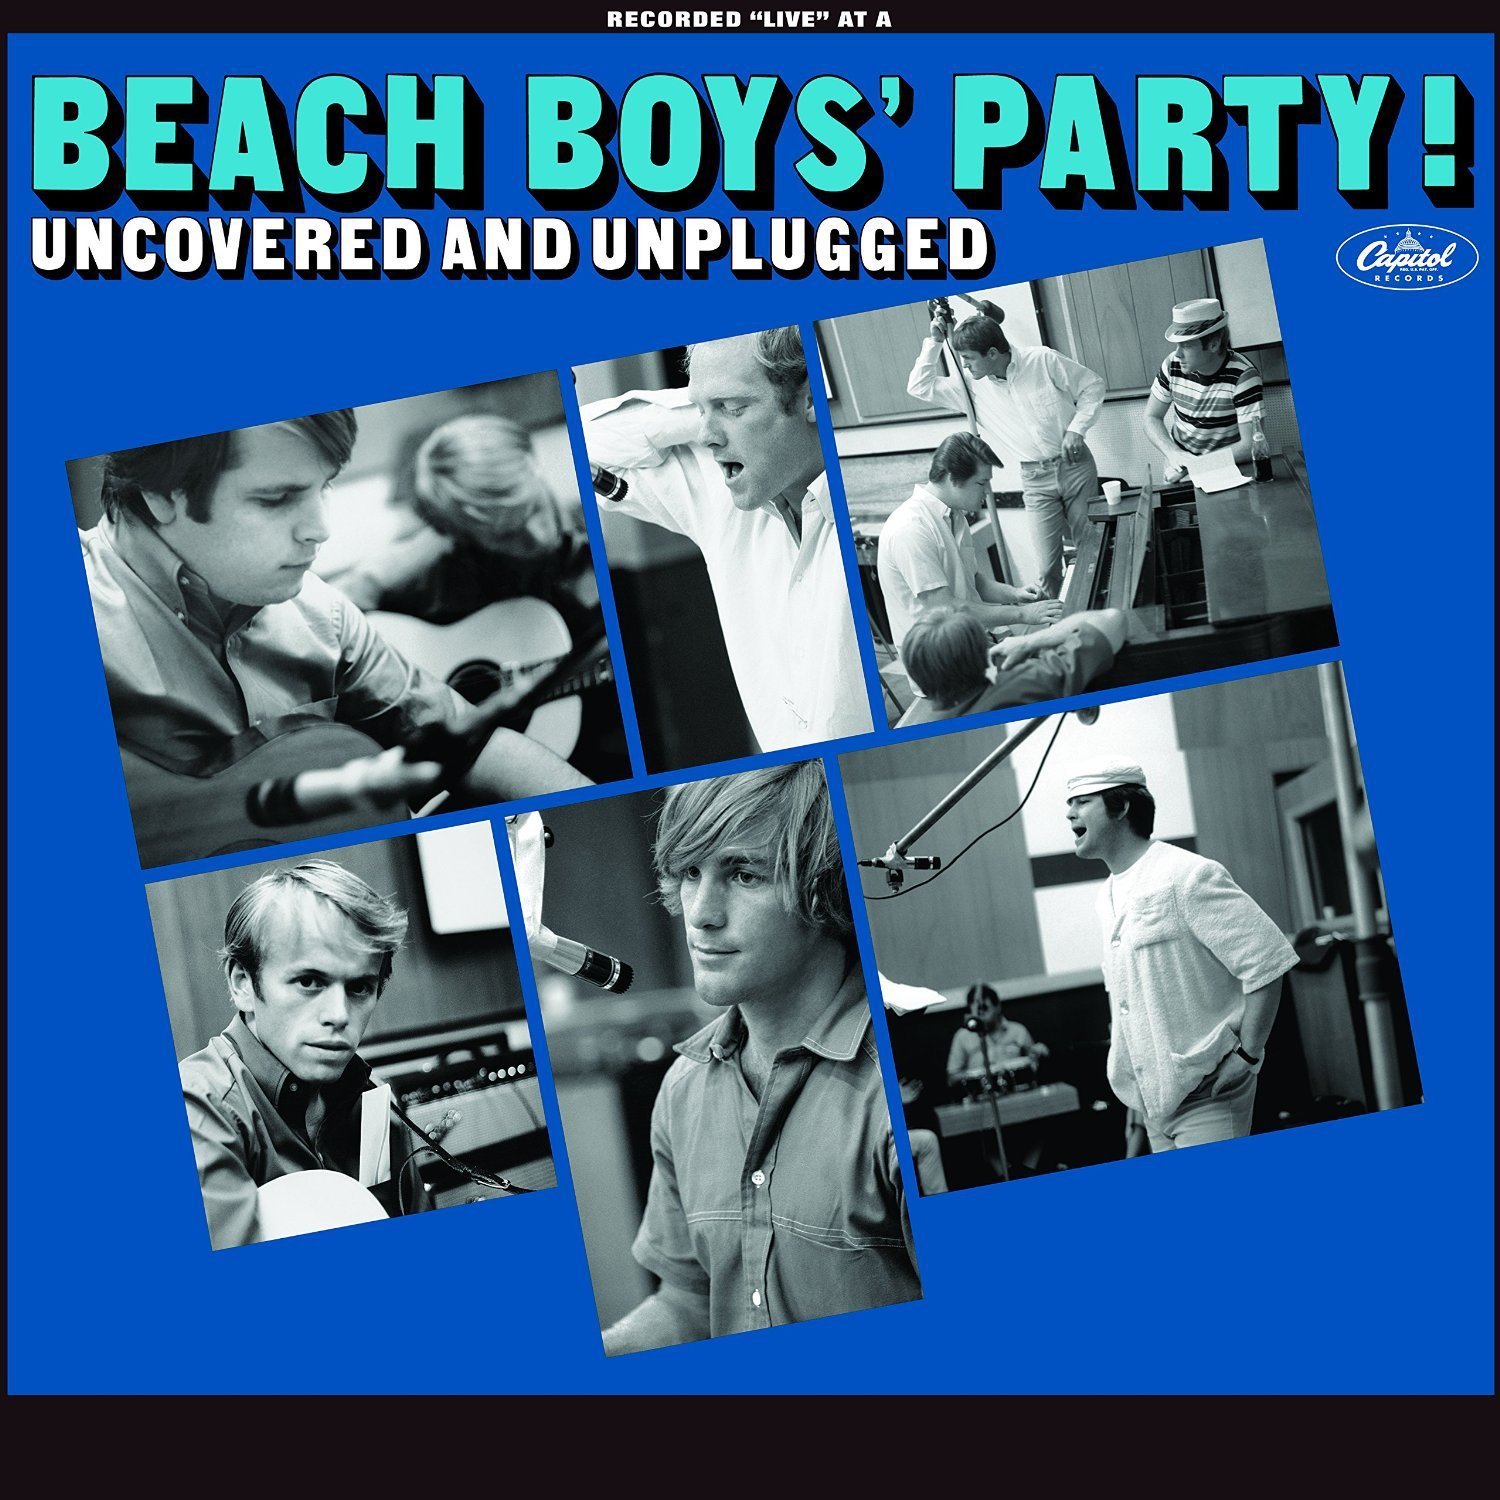 The Beach Boys-The Beach Boys Party Uncovered And Unplugged-24-88-WEB-FLAC-2015-OBZEN